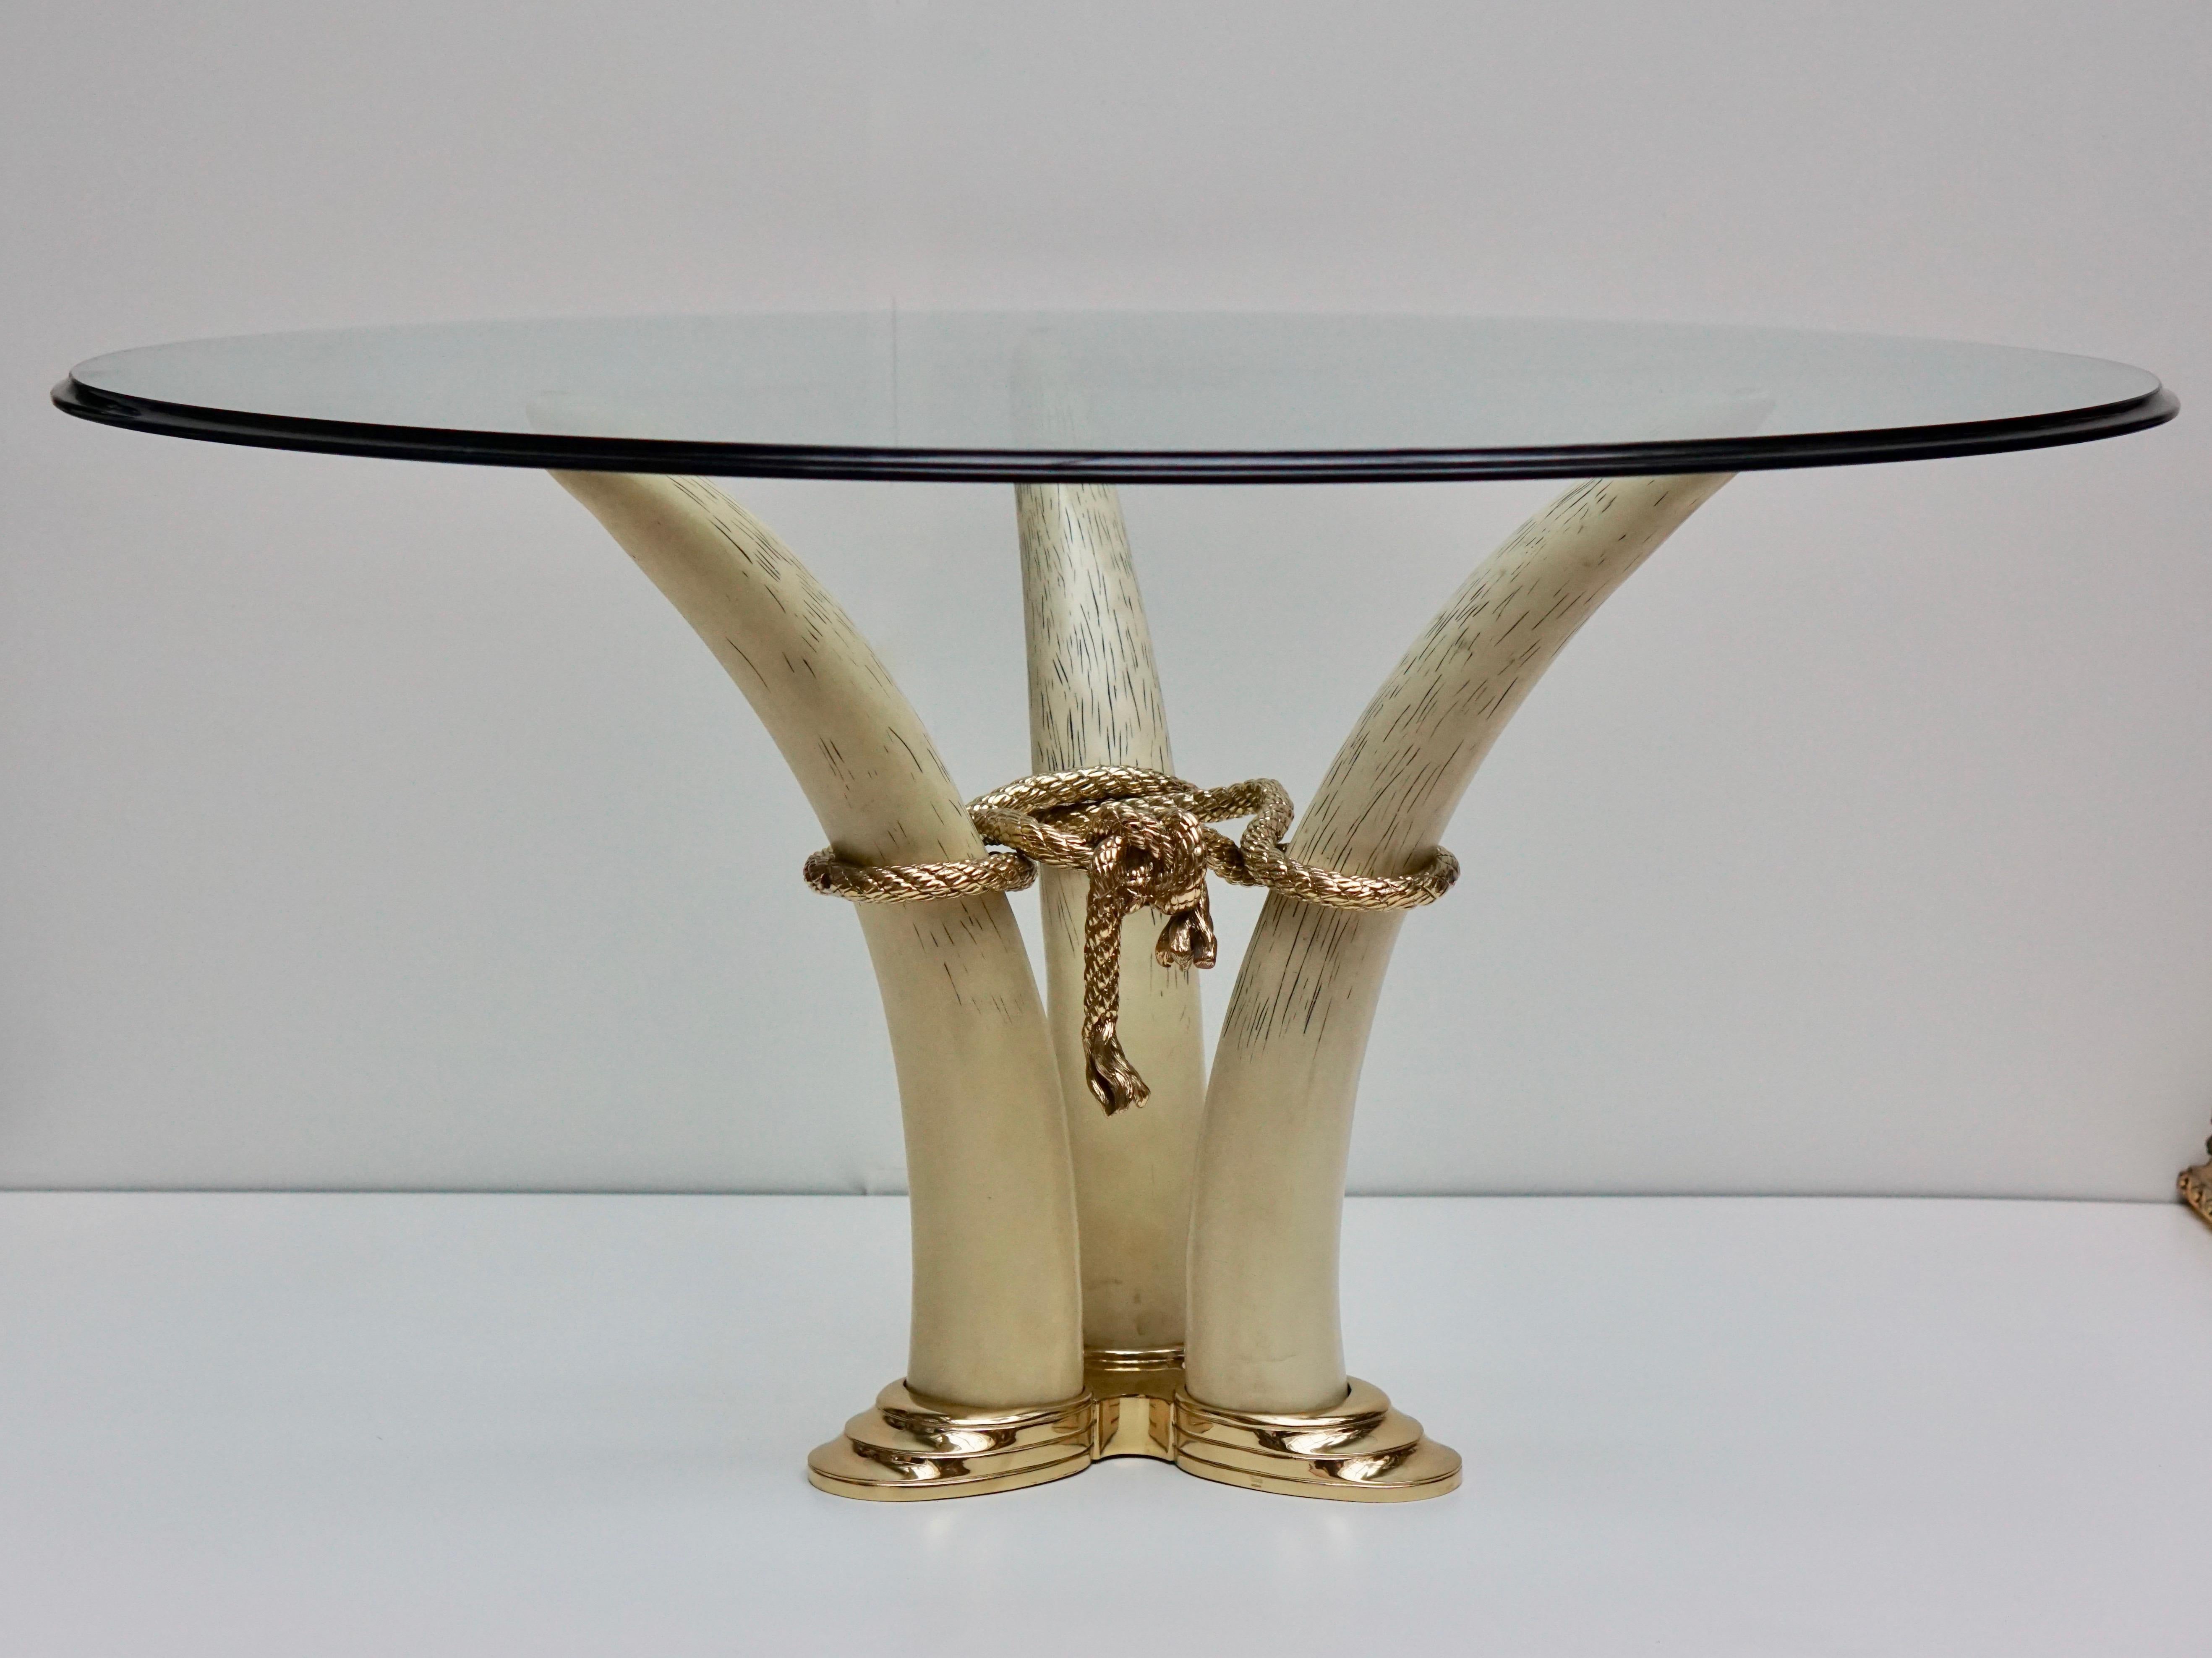 Hollywood Regency Dining Table by Valenti, Barcelona, Spain, circa 1970-1980 In Good Condition For Sale In Antwerp, BE